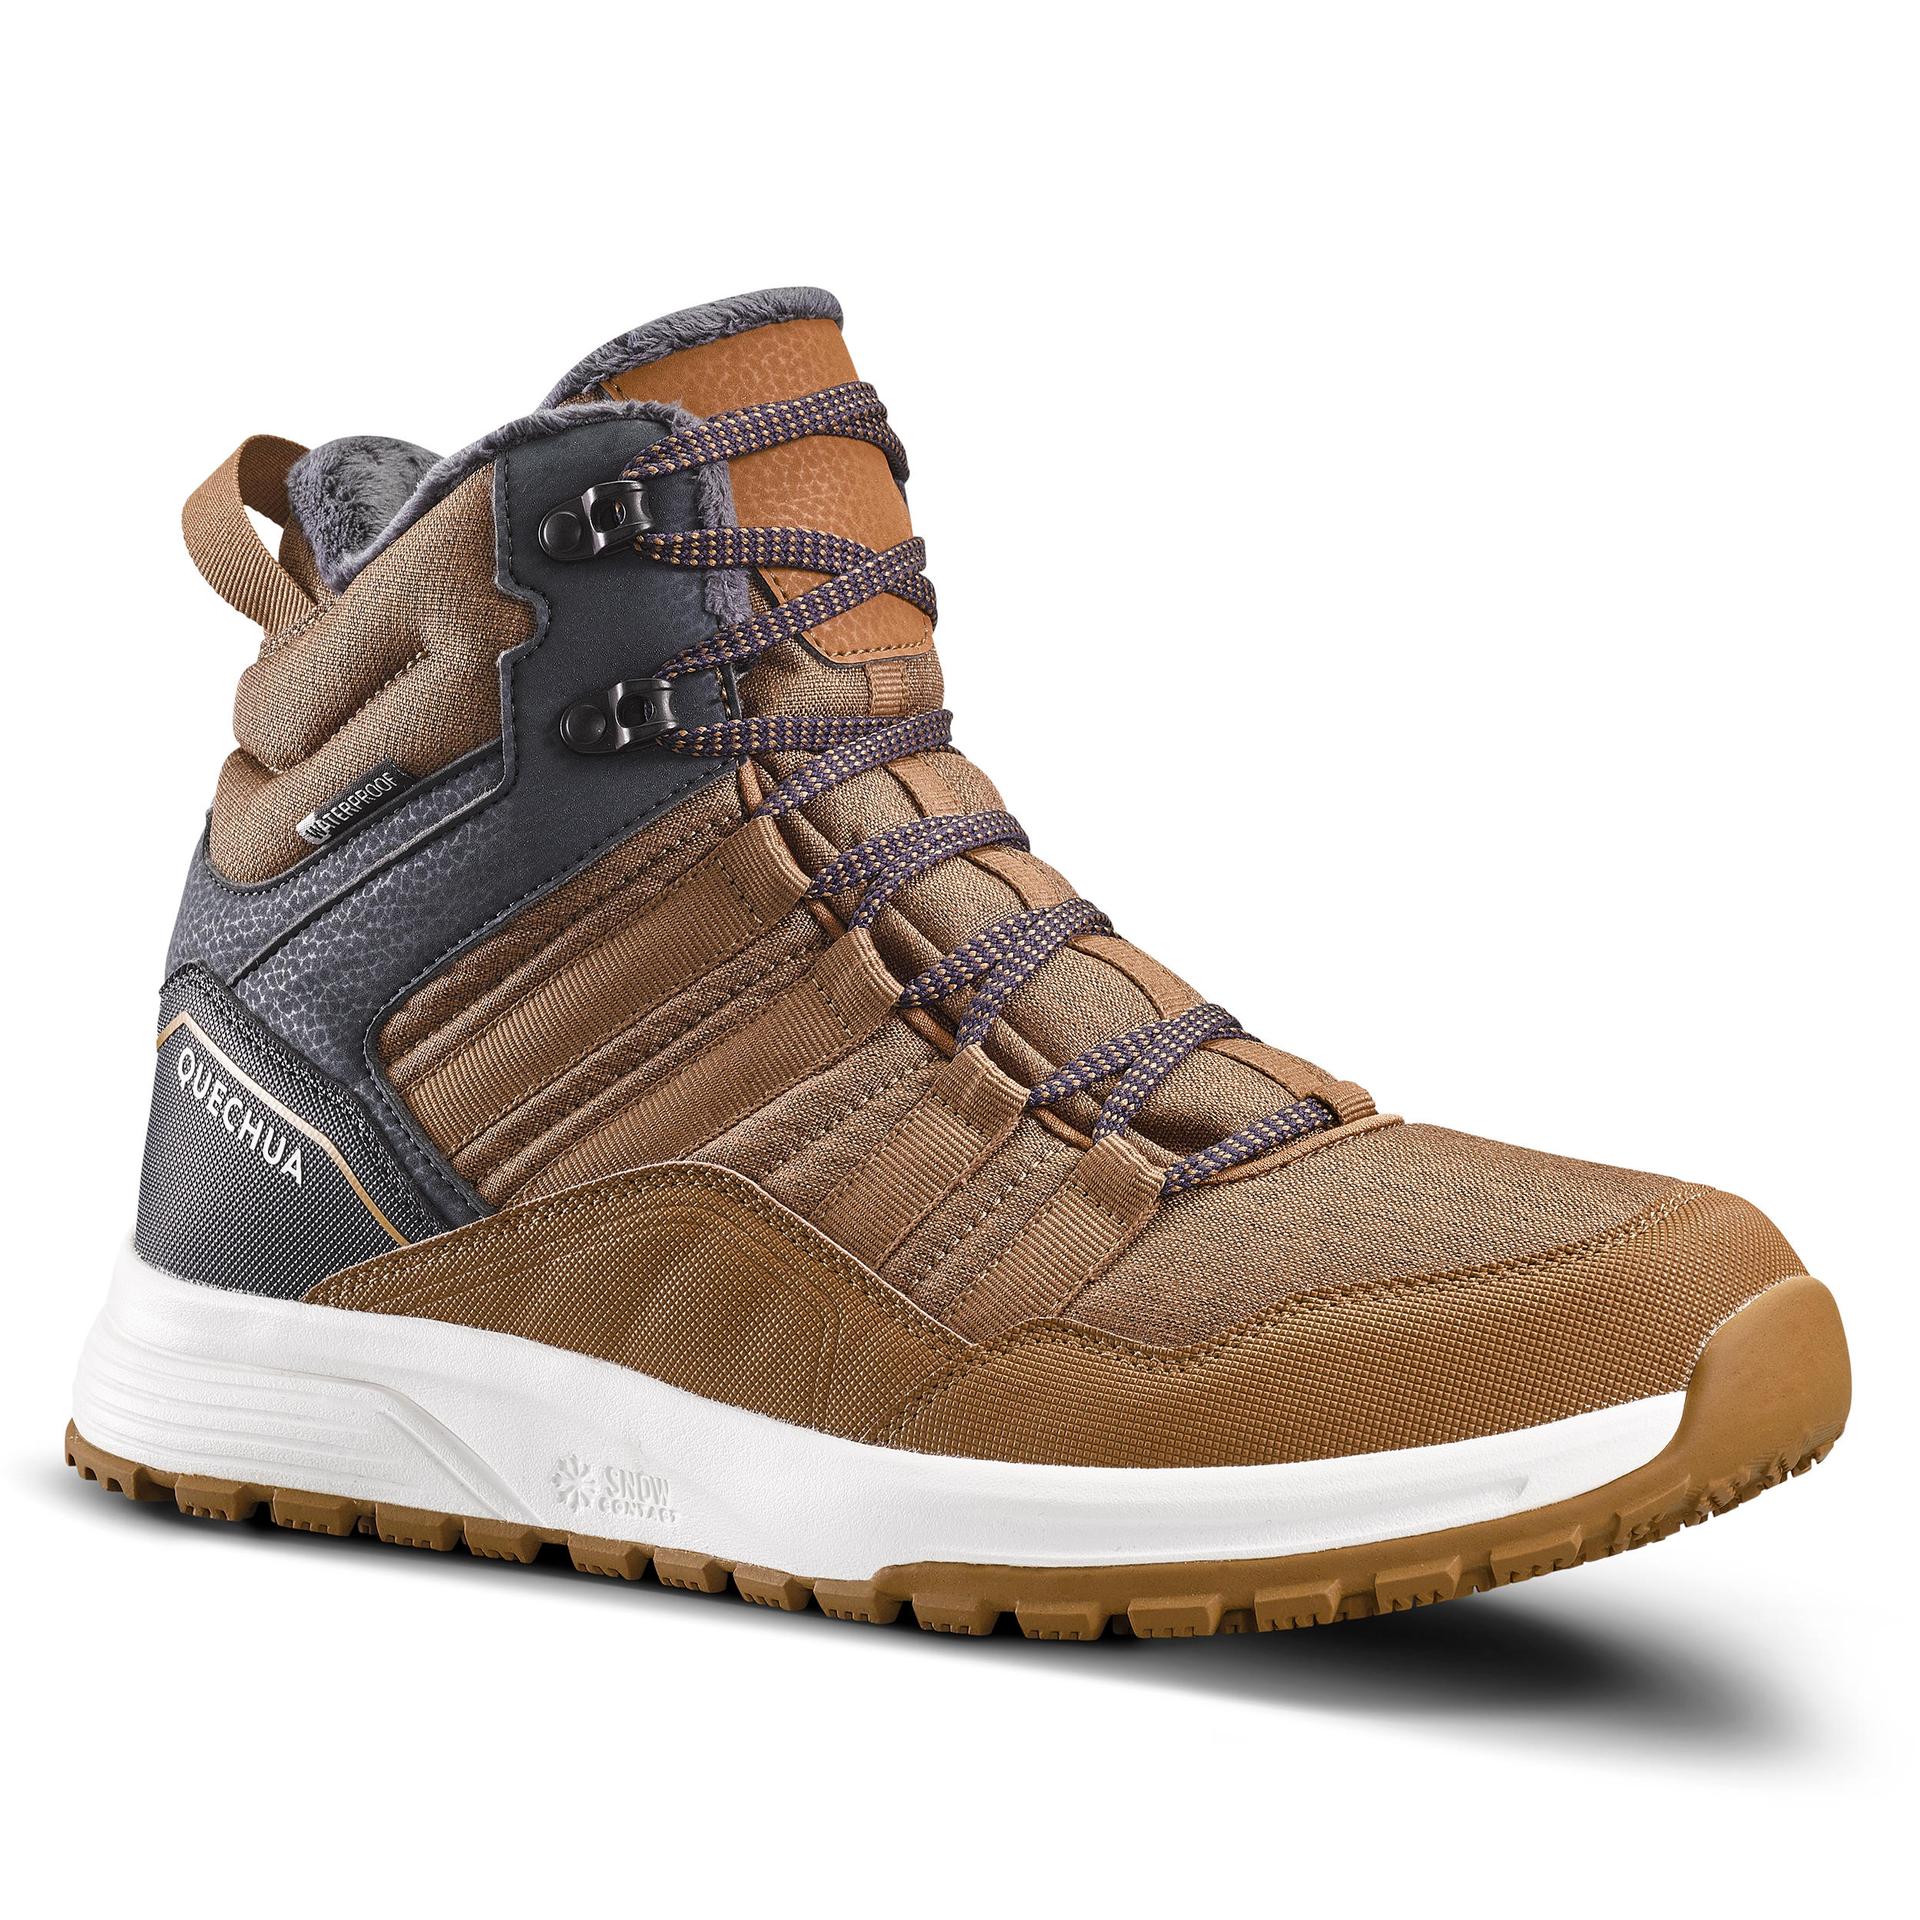 men's warm and waterproof hiking boots - sh500 mid